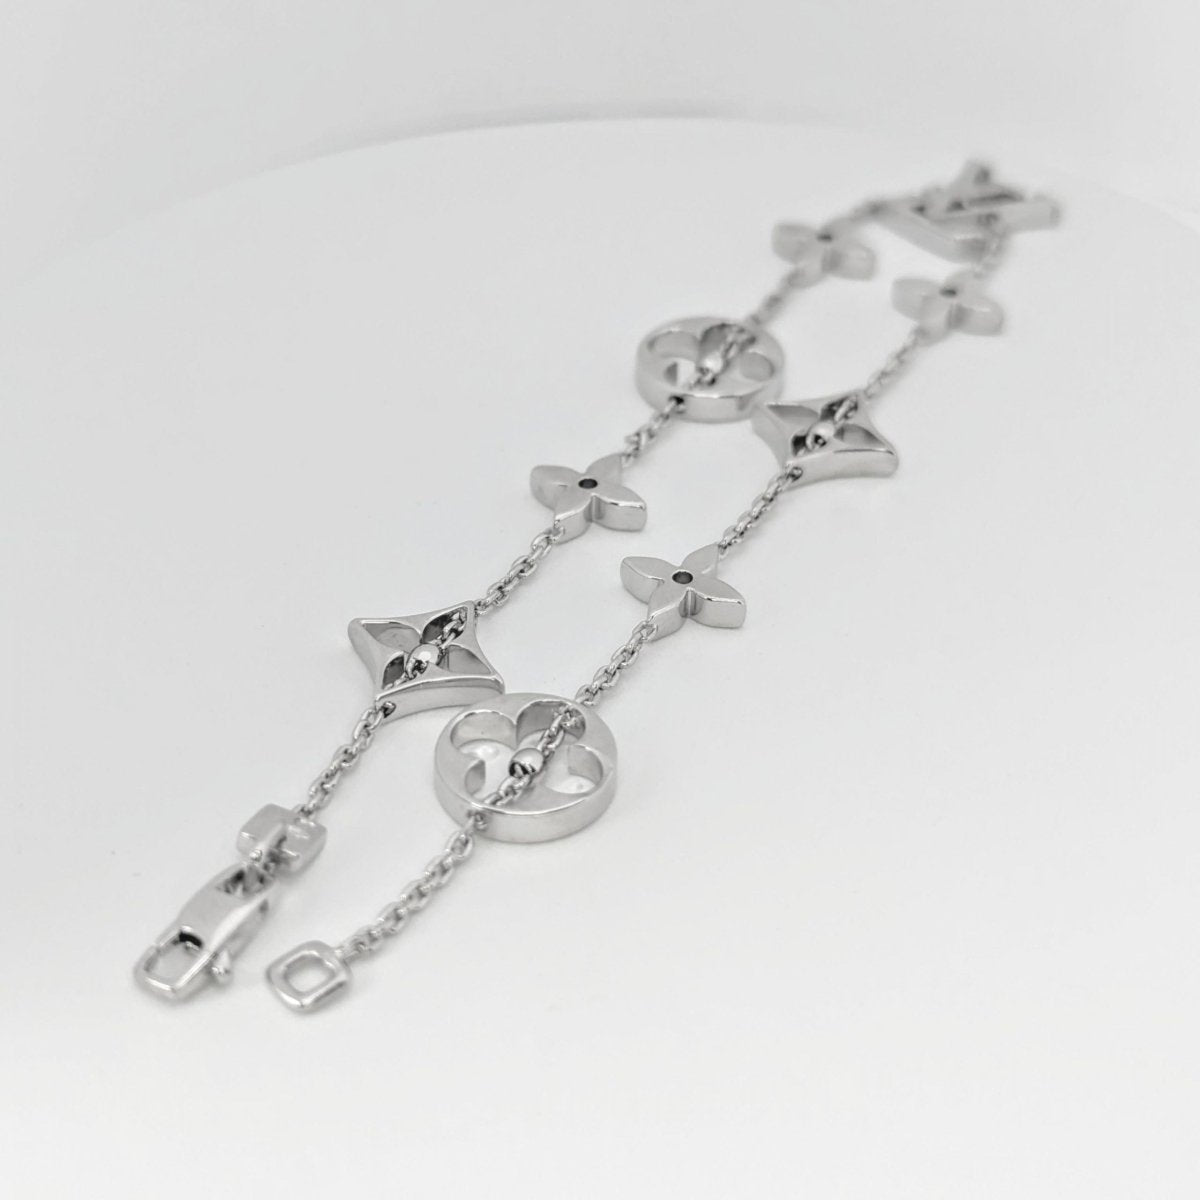 Louis Vuitton - Authenticated Idylle Blossom Bracelet - White Gold Silver for Women, Very Good Condition